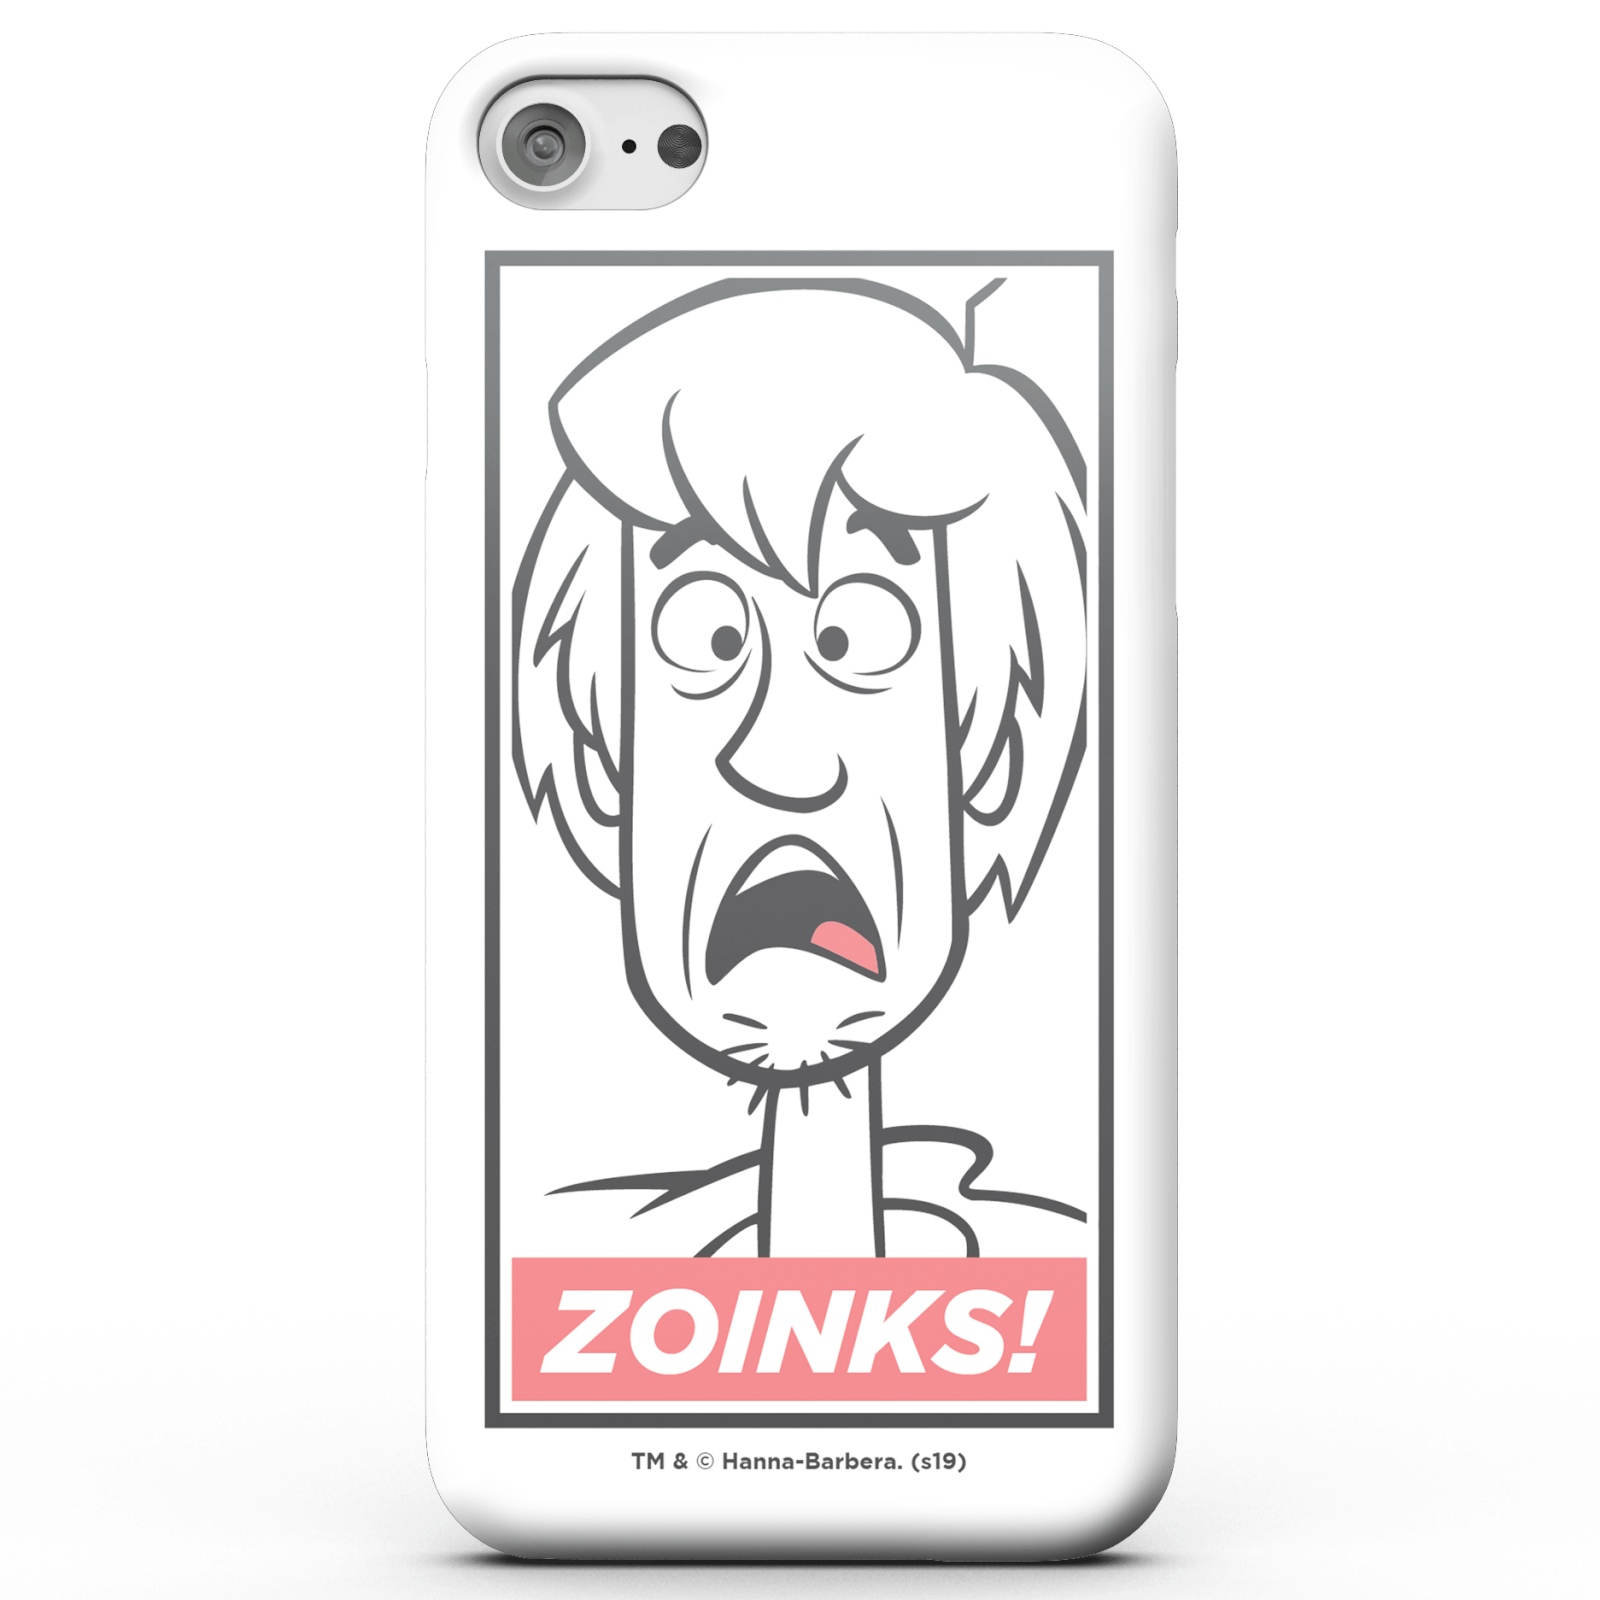 Funda Móvil Scooby-Doo Zoinks! para iPhone y Android - iPhone 6 Plus - Carcasa doble capa - Mate